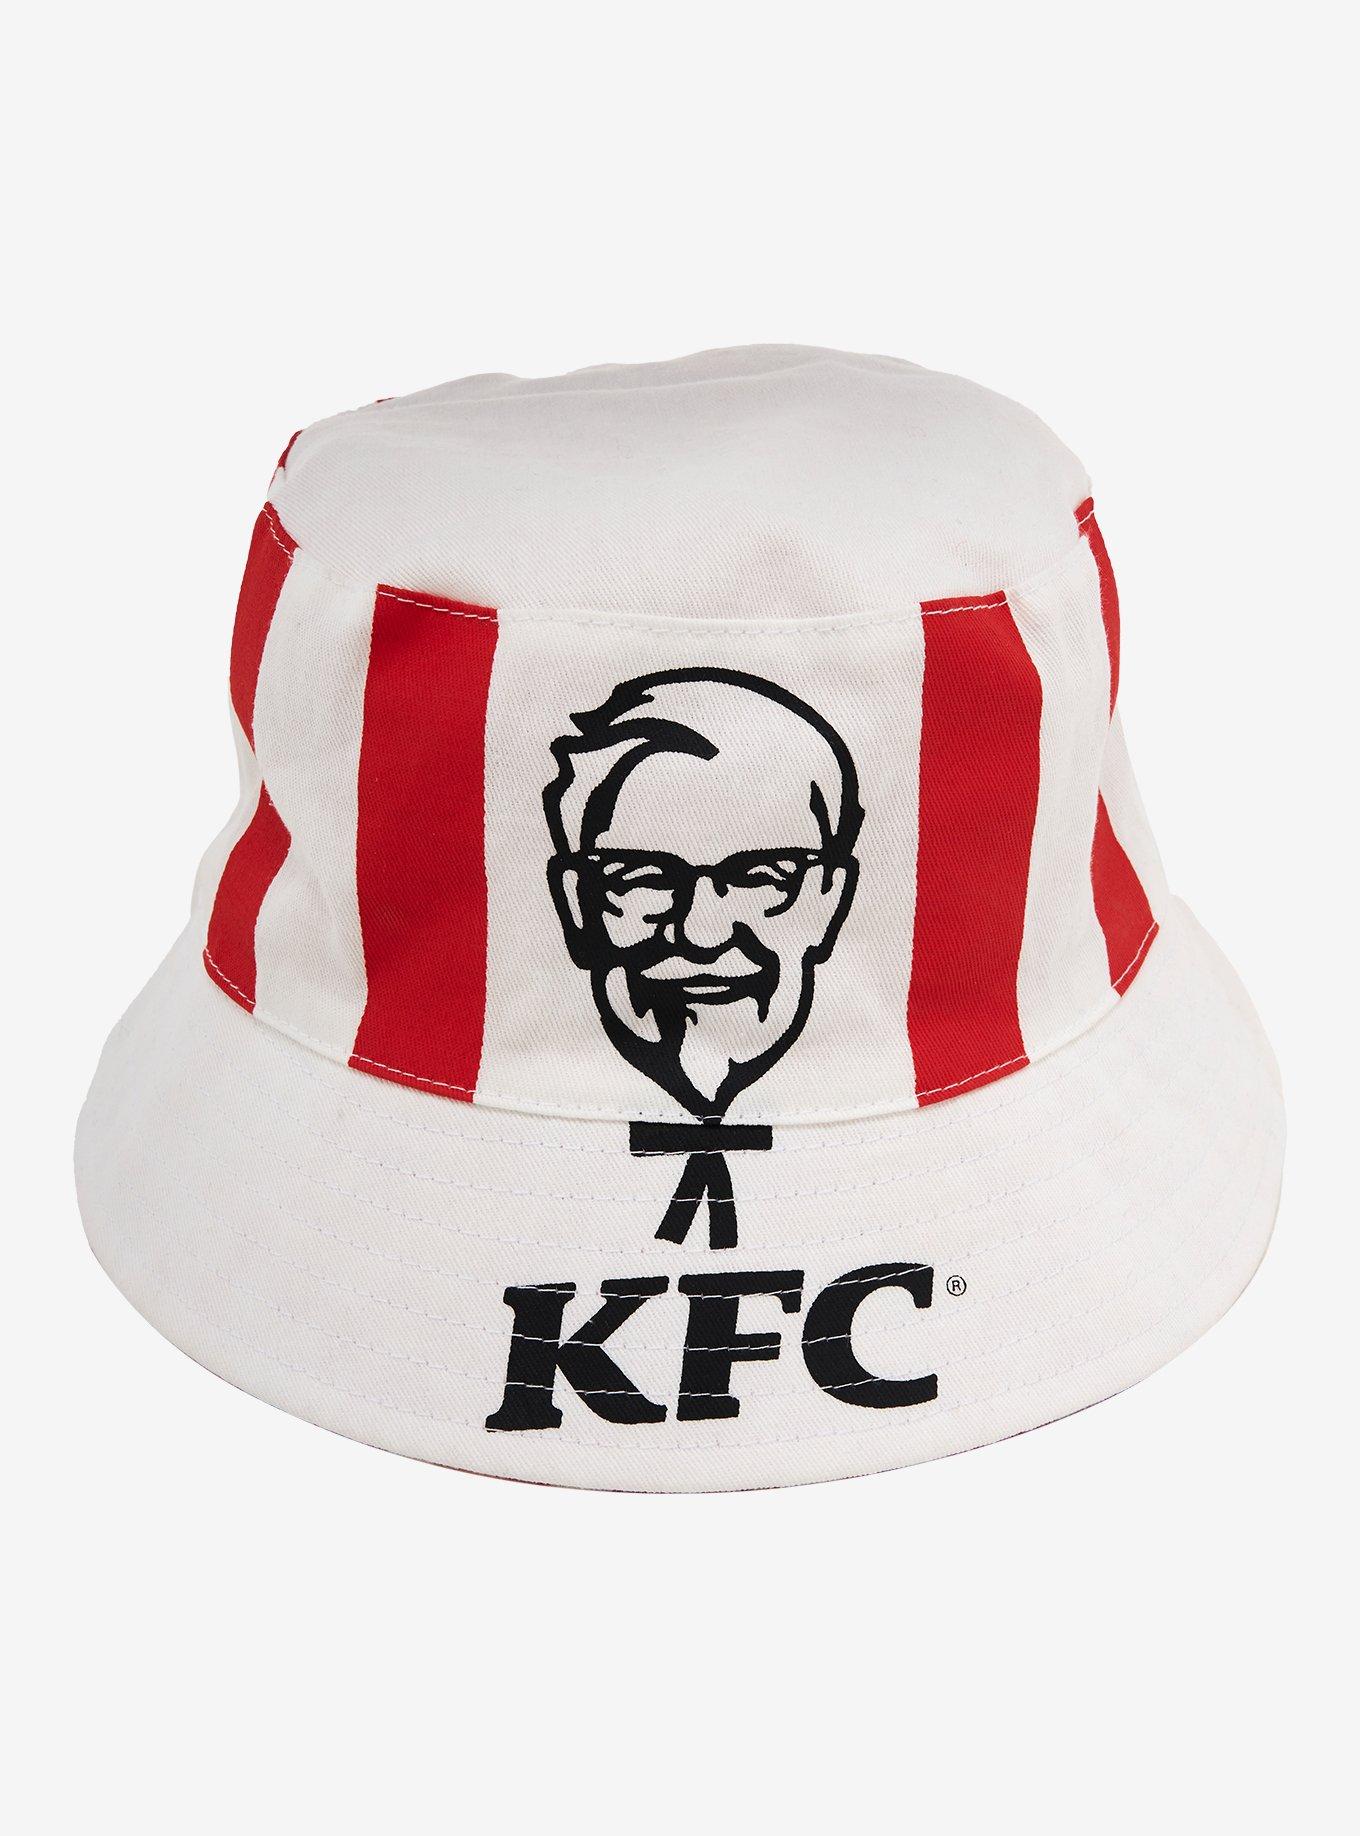 KFC Fried Chicken Checkered Allover Print Reversible Bucket Hat - BoxLunch Exclusive, , hi-res